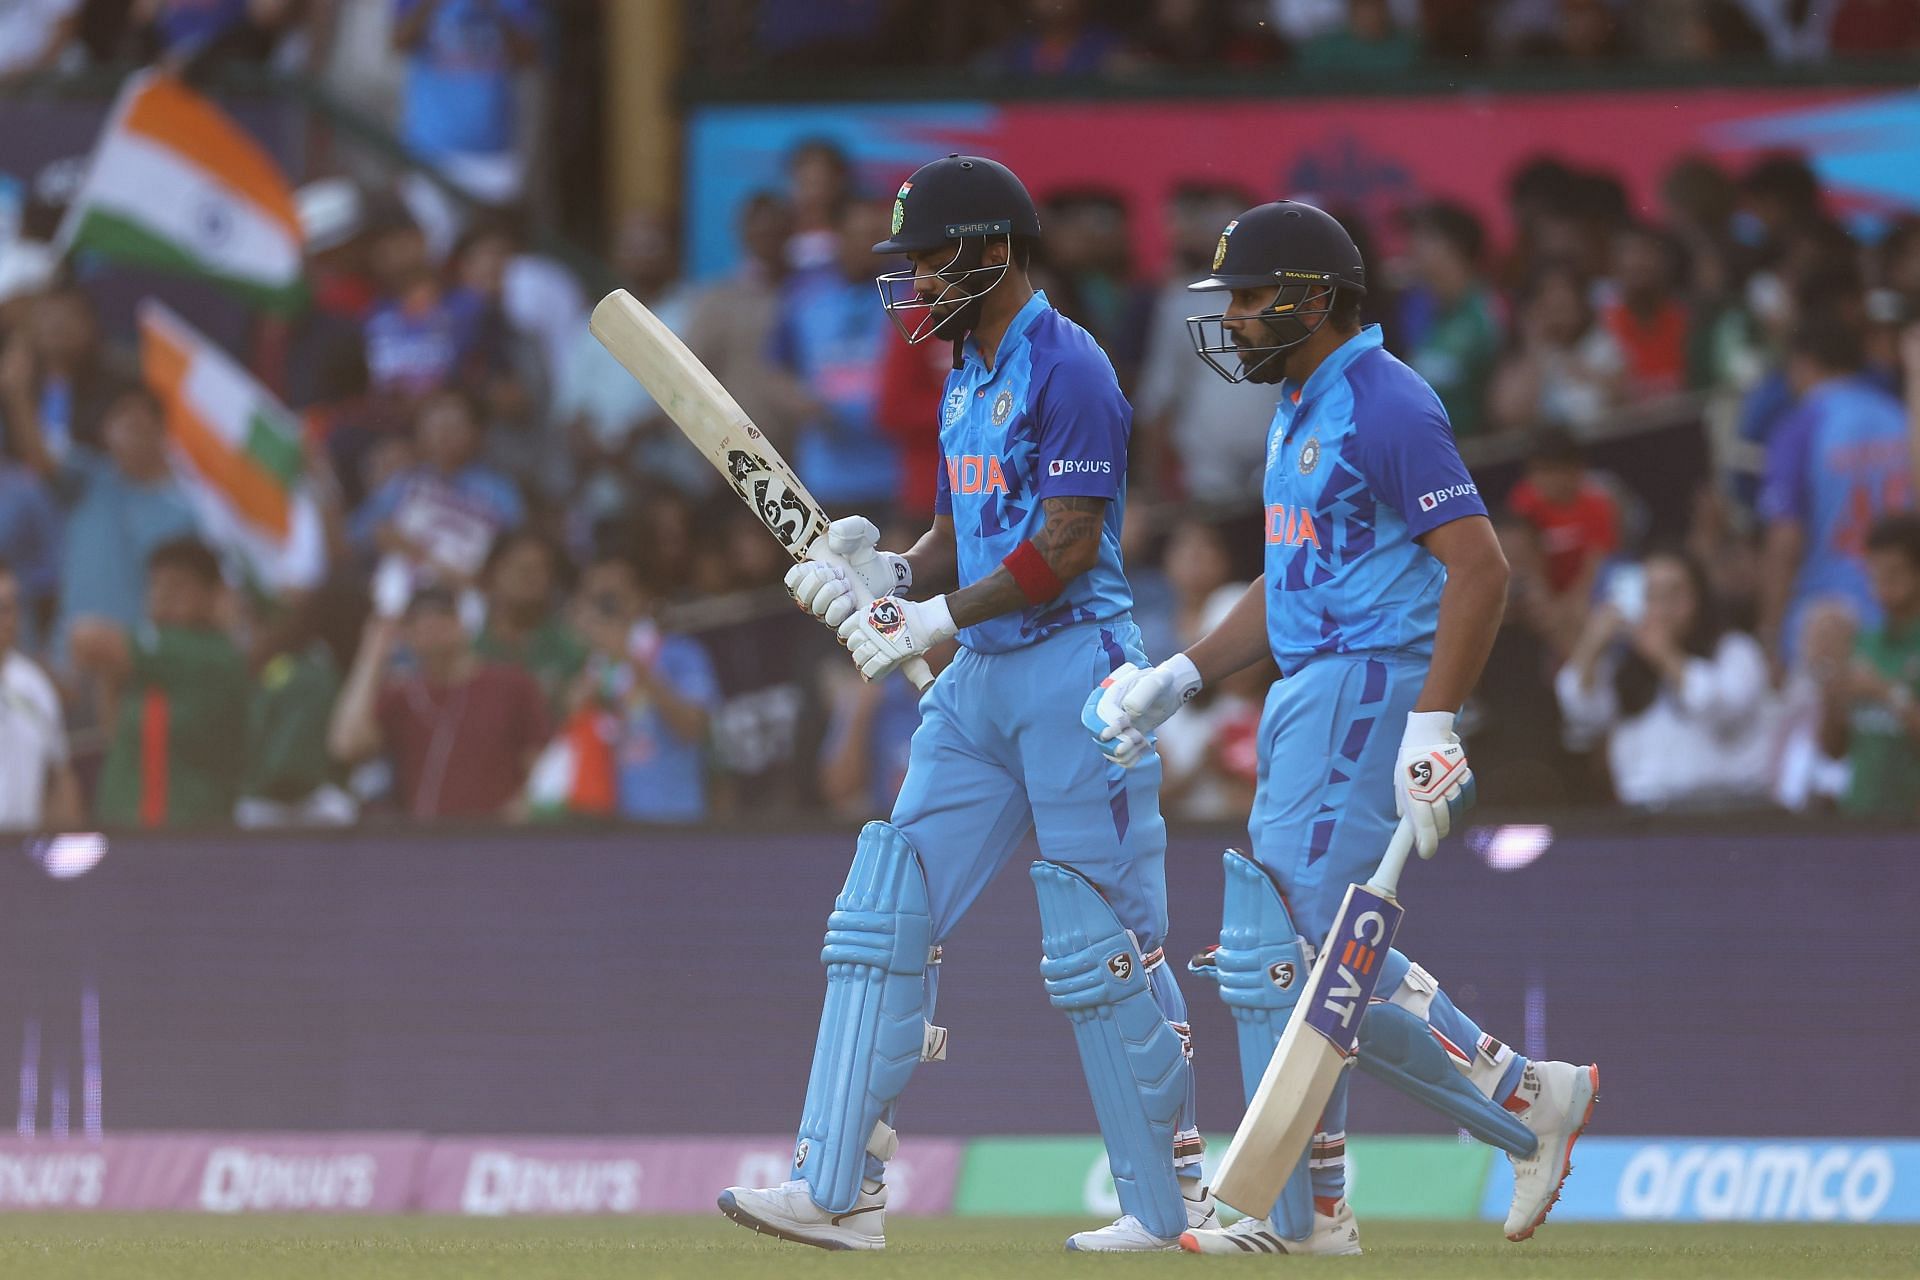 The Indian team adopted a conservative approach at the top of the order in the T20 World Cup.